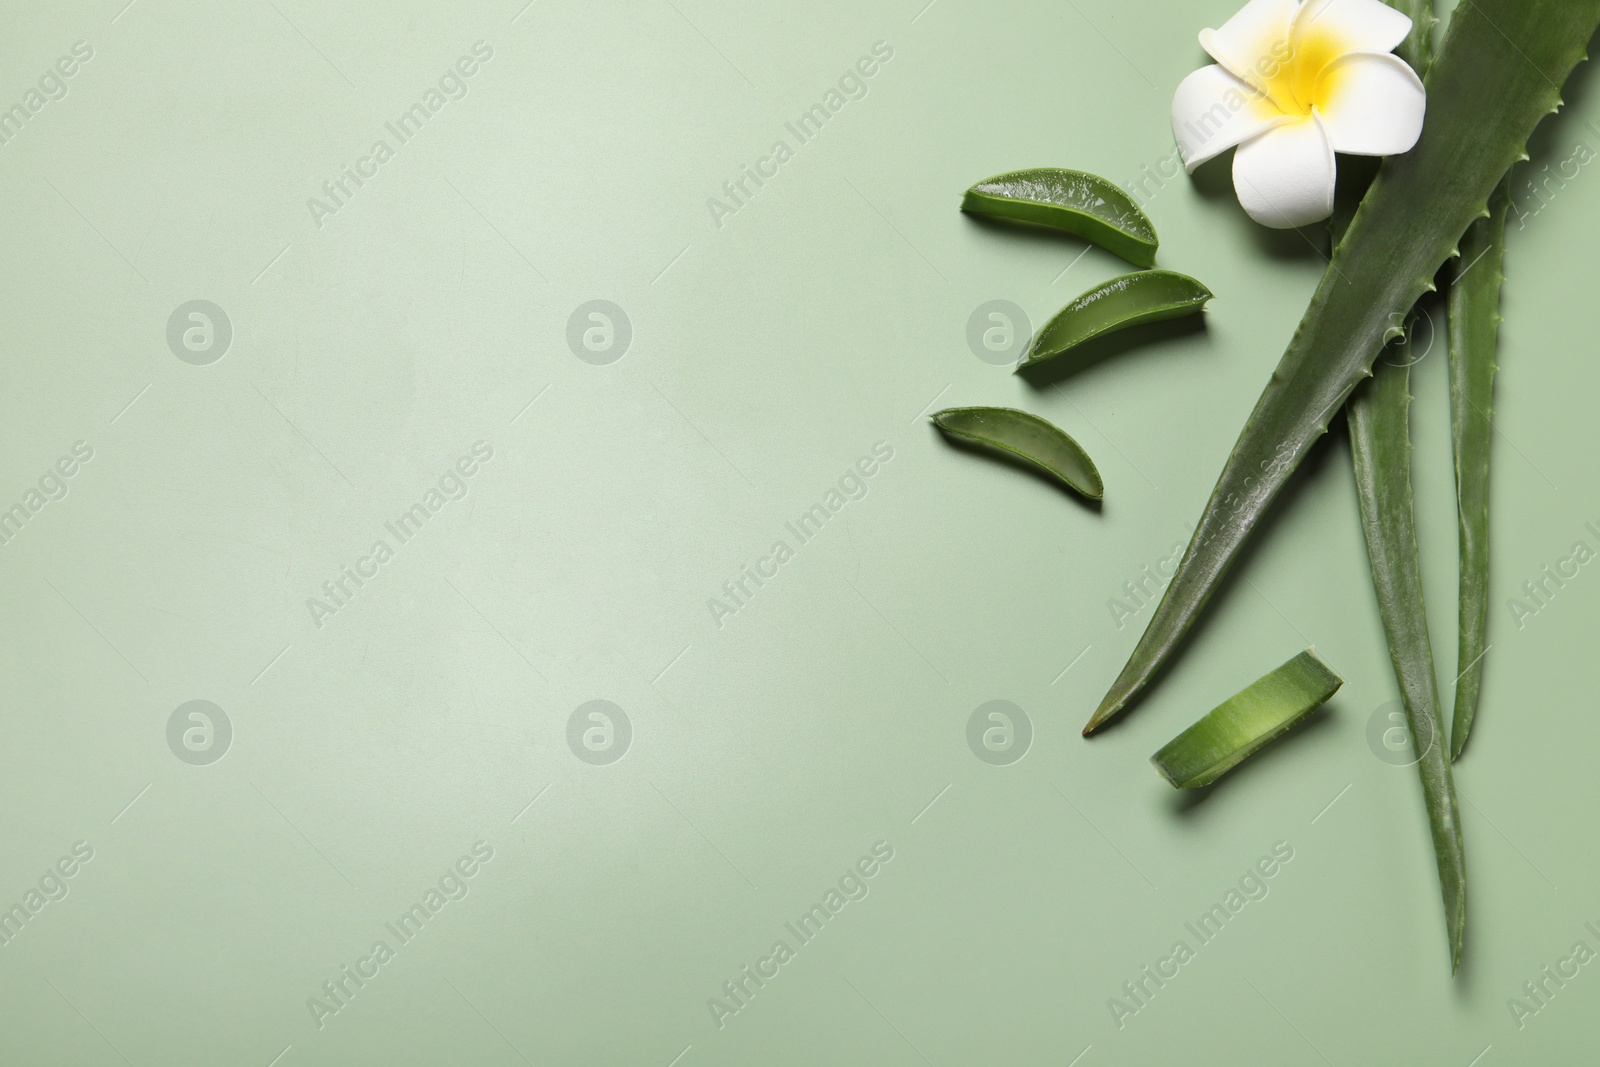 Photo of Cut aloe vera leaves and plumeria flower on light green background, flat lay. Space for text